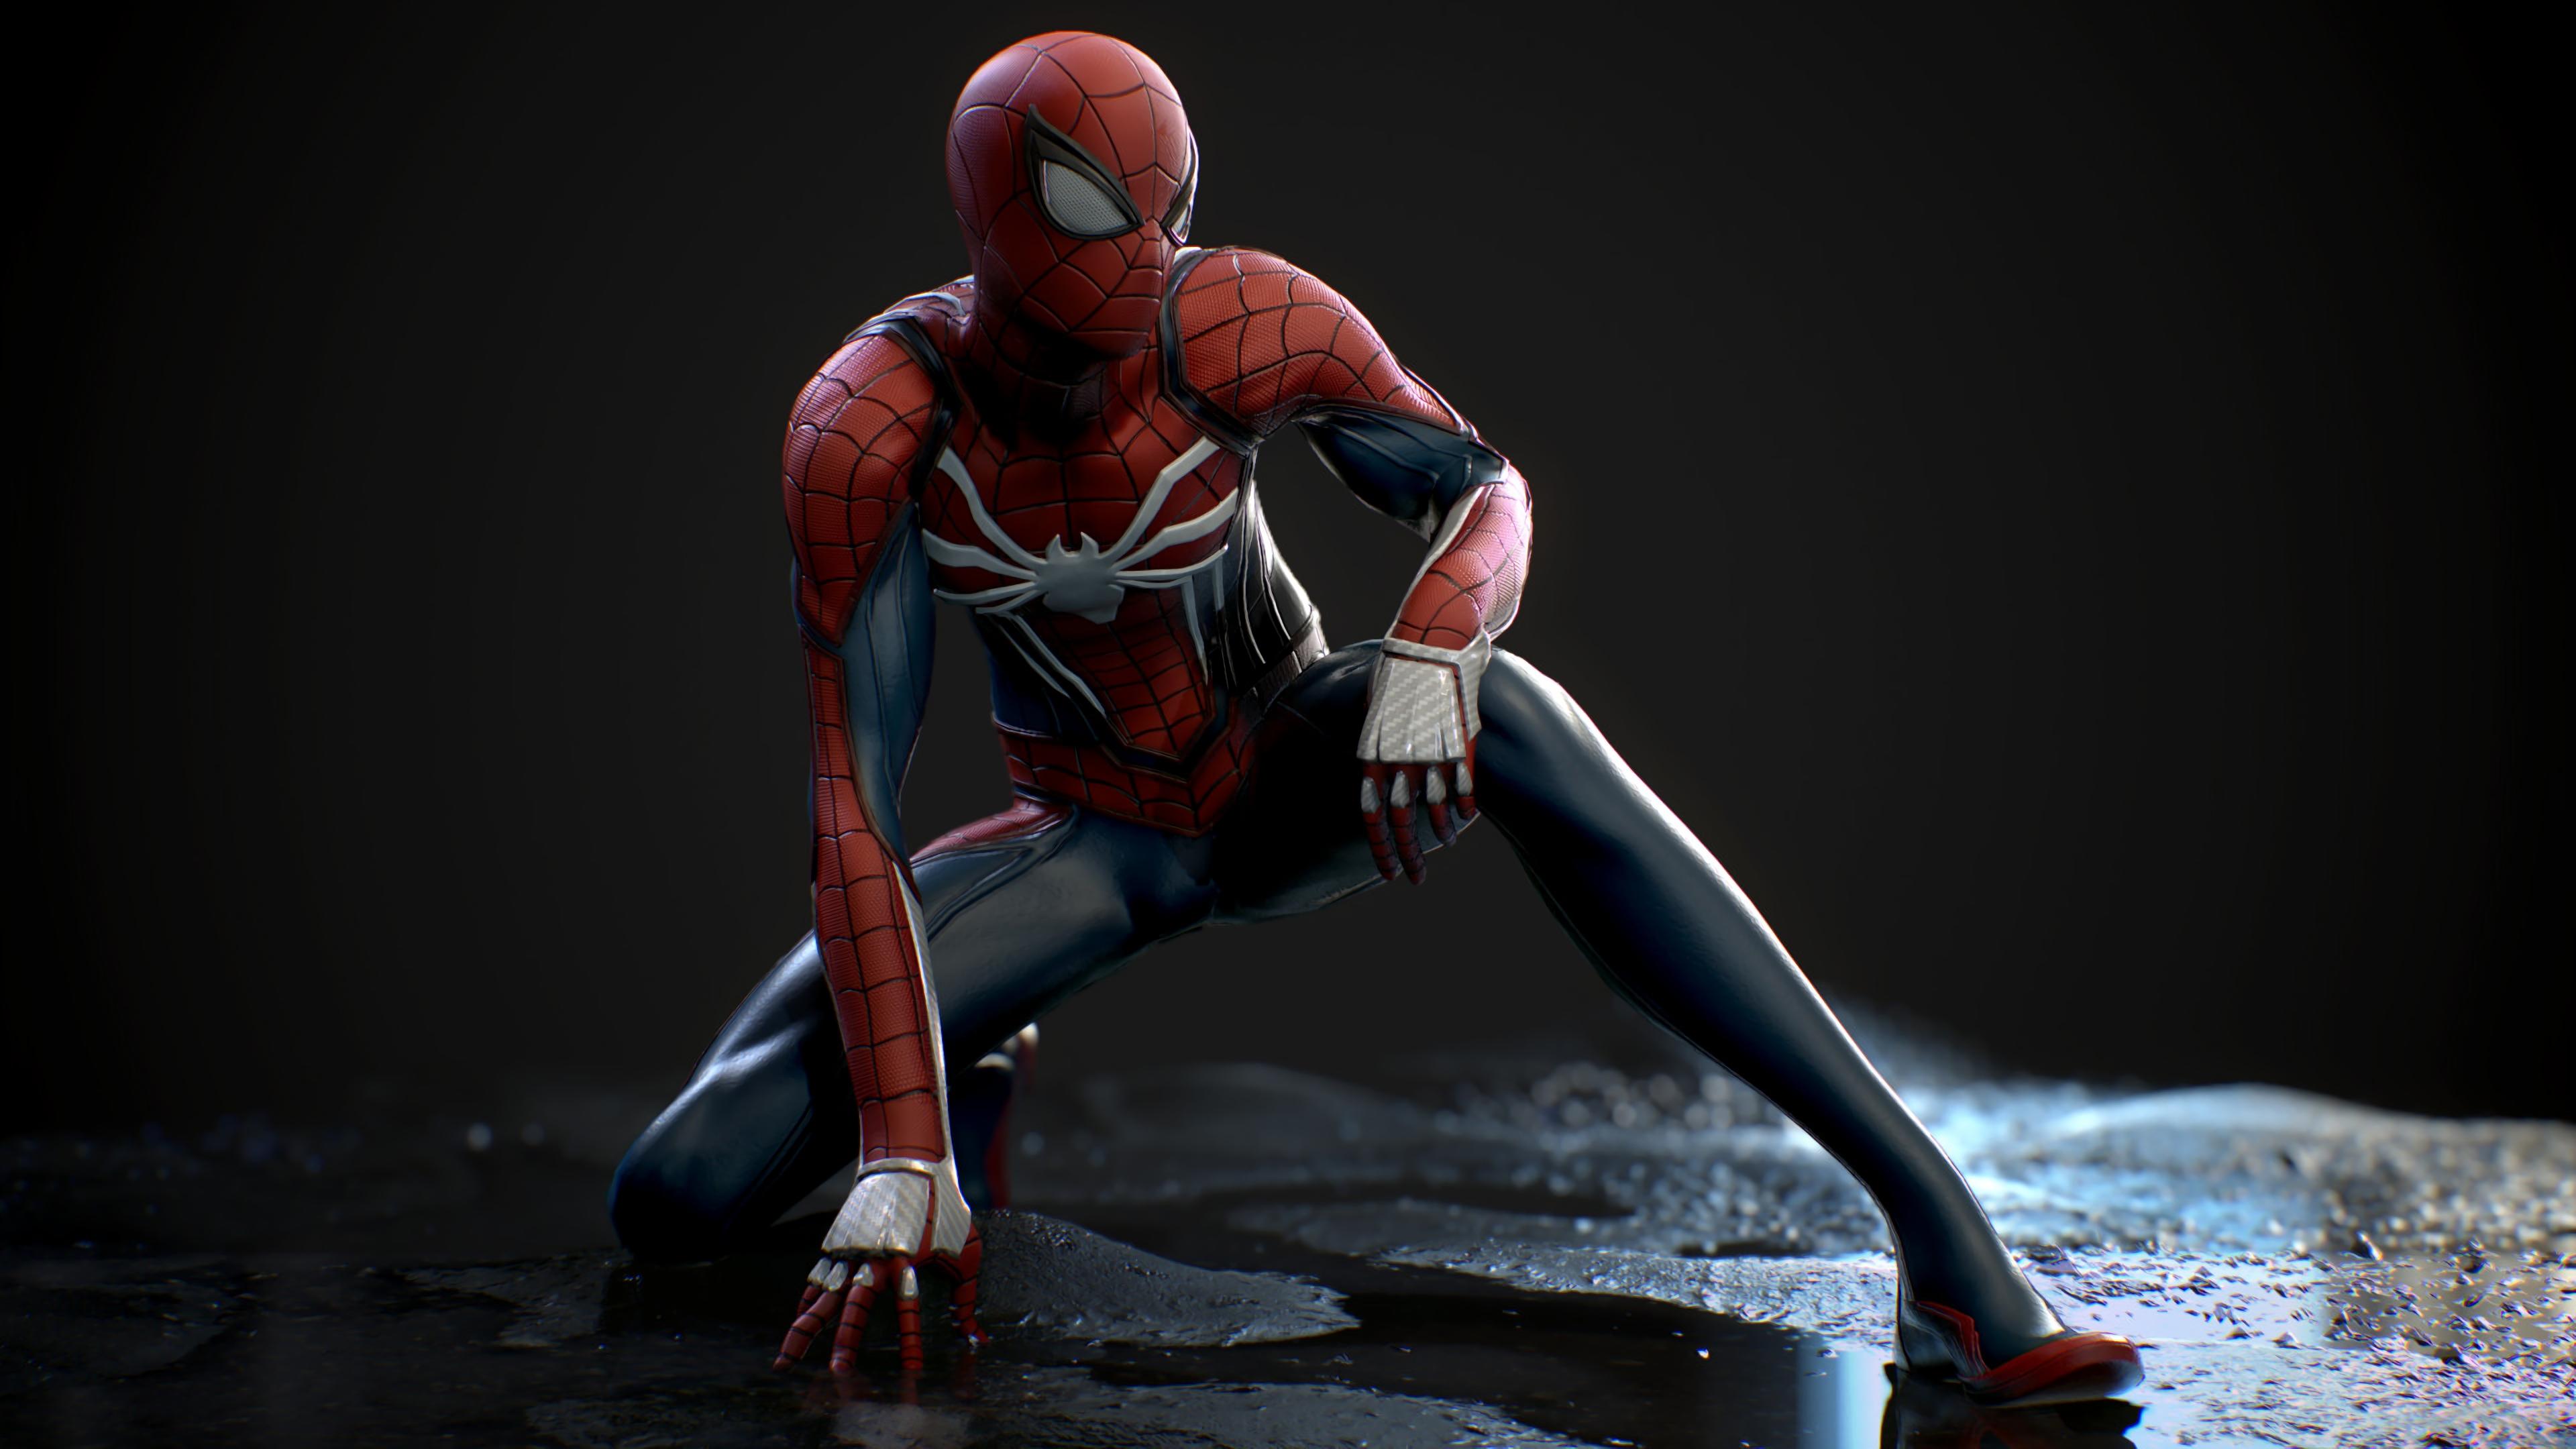 3840 x 2160 · jpeg - Spiderman PS4 Pro4k 2018, HD Games, 4k Wallpapers, Images, Backgrounds ...